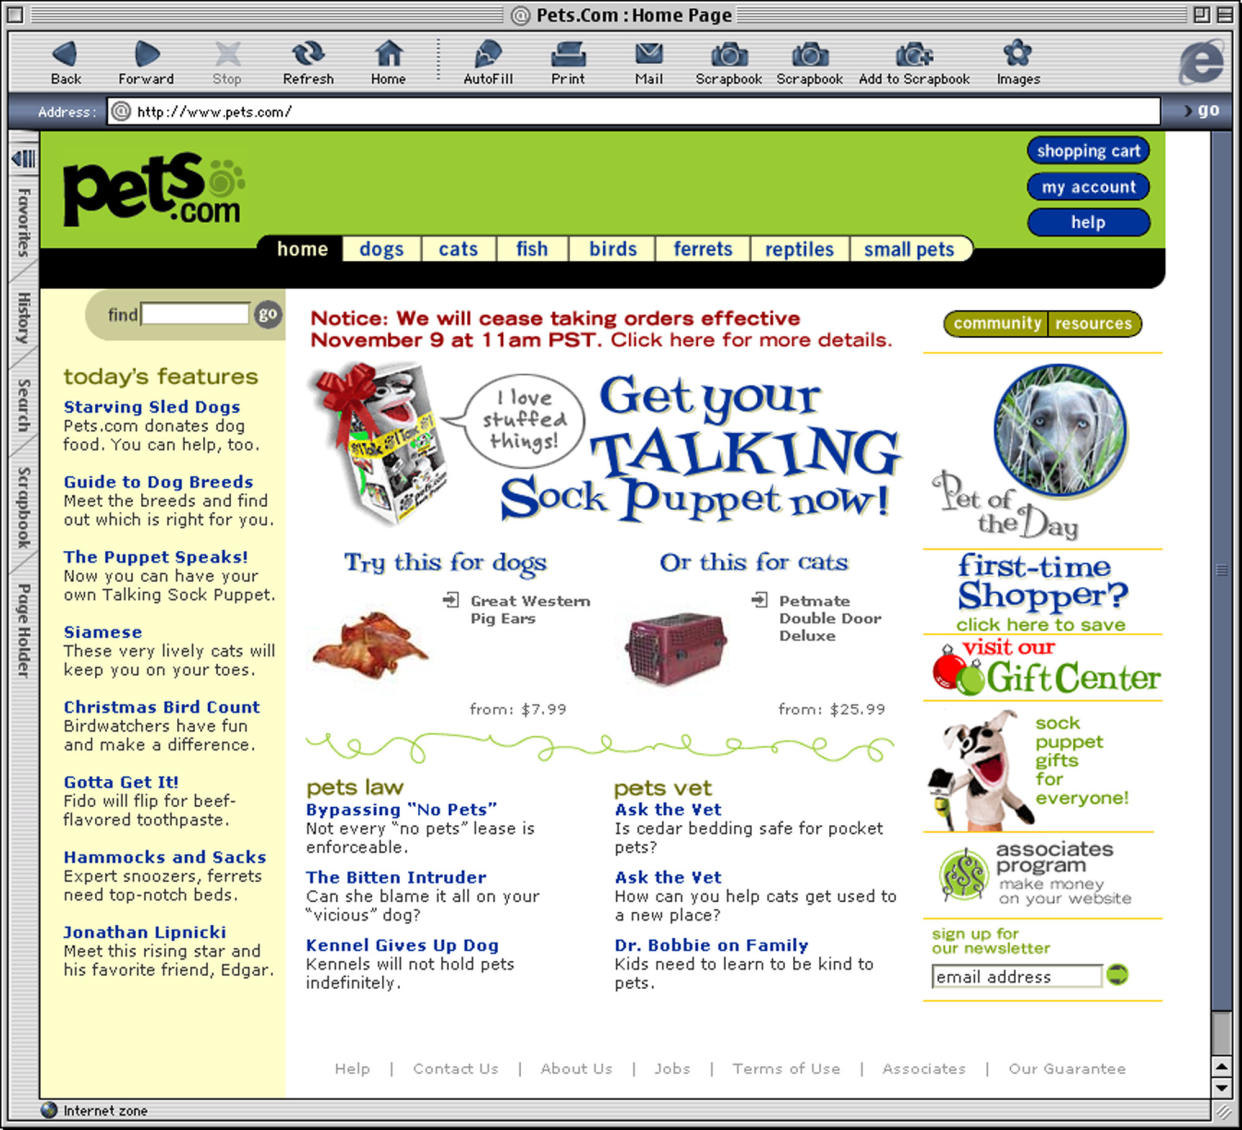 381562 01: Pets.com, the leading online pet retailer, announced November 7, 2000 that it was closing down and laying off more than 250 of its 320 employees after being unable to find a purchaser or a financial backer for the company. Pets.com is best known for its witty television ads featuring a sock puppet dog. (Photo by Newsmakers)